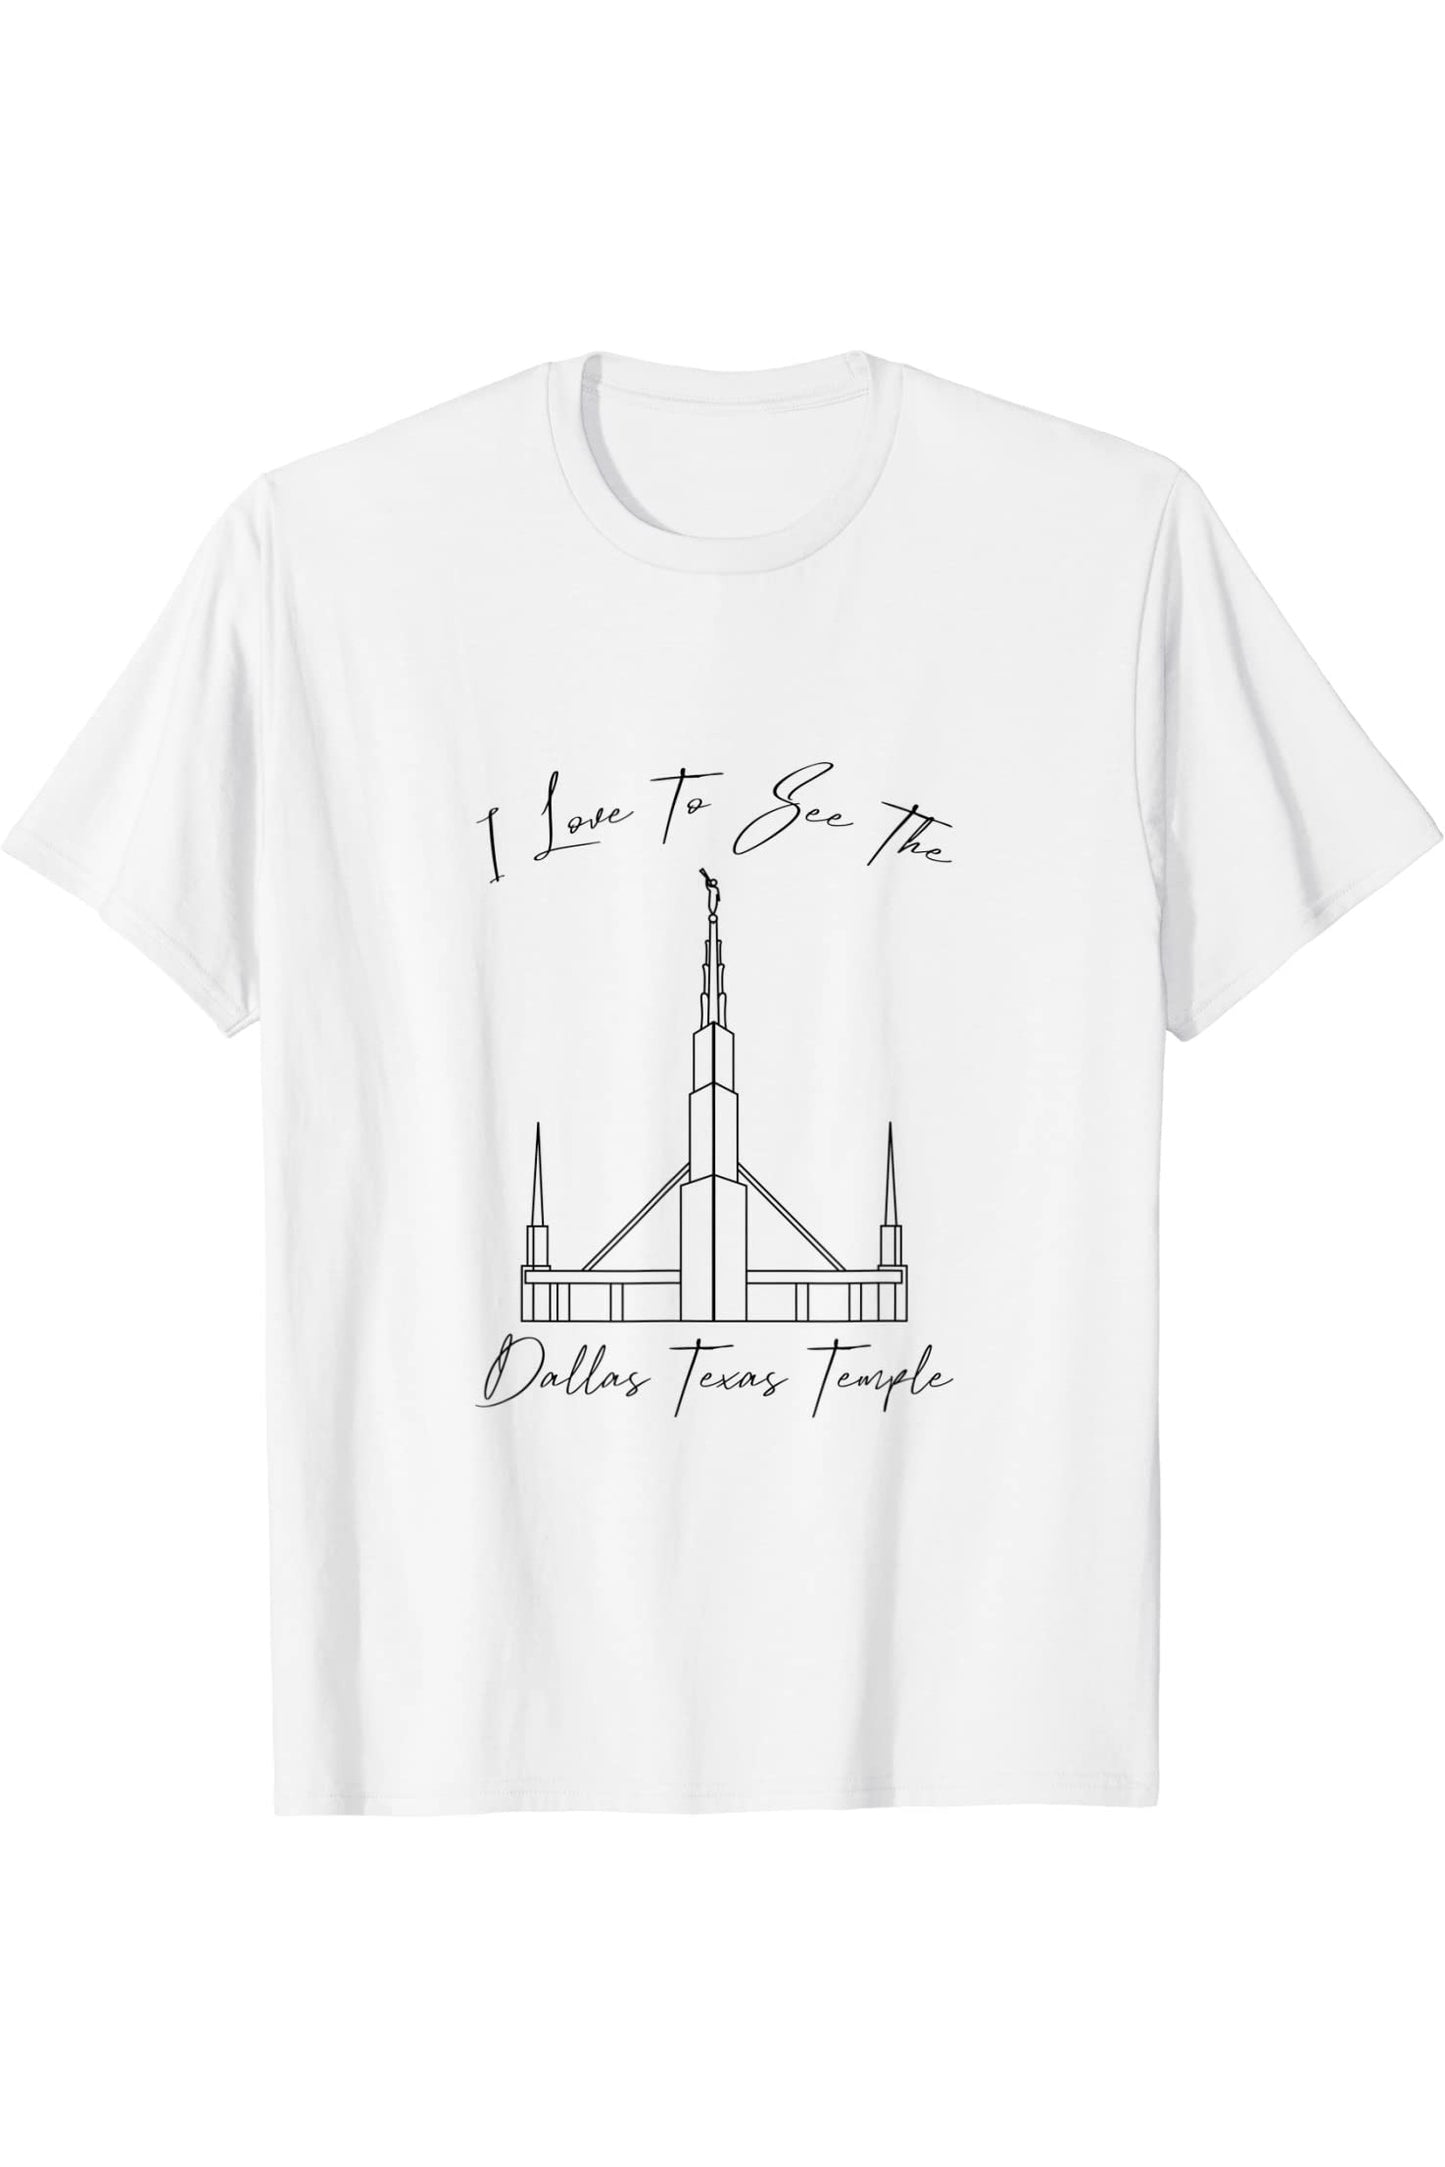 Dallas Texas Temple T-Shirt - Calligraphy Style (English) US